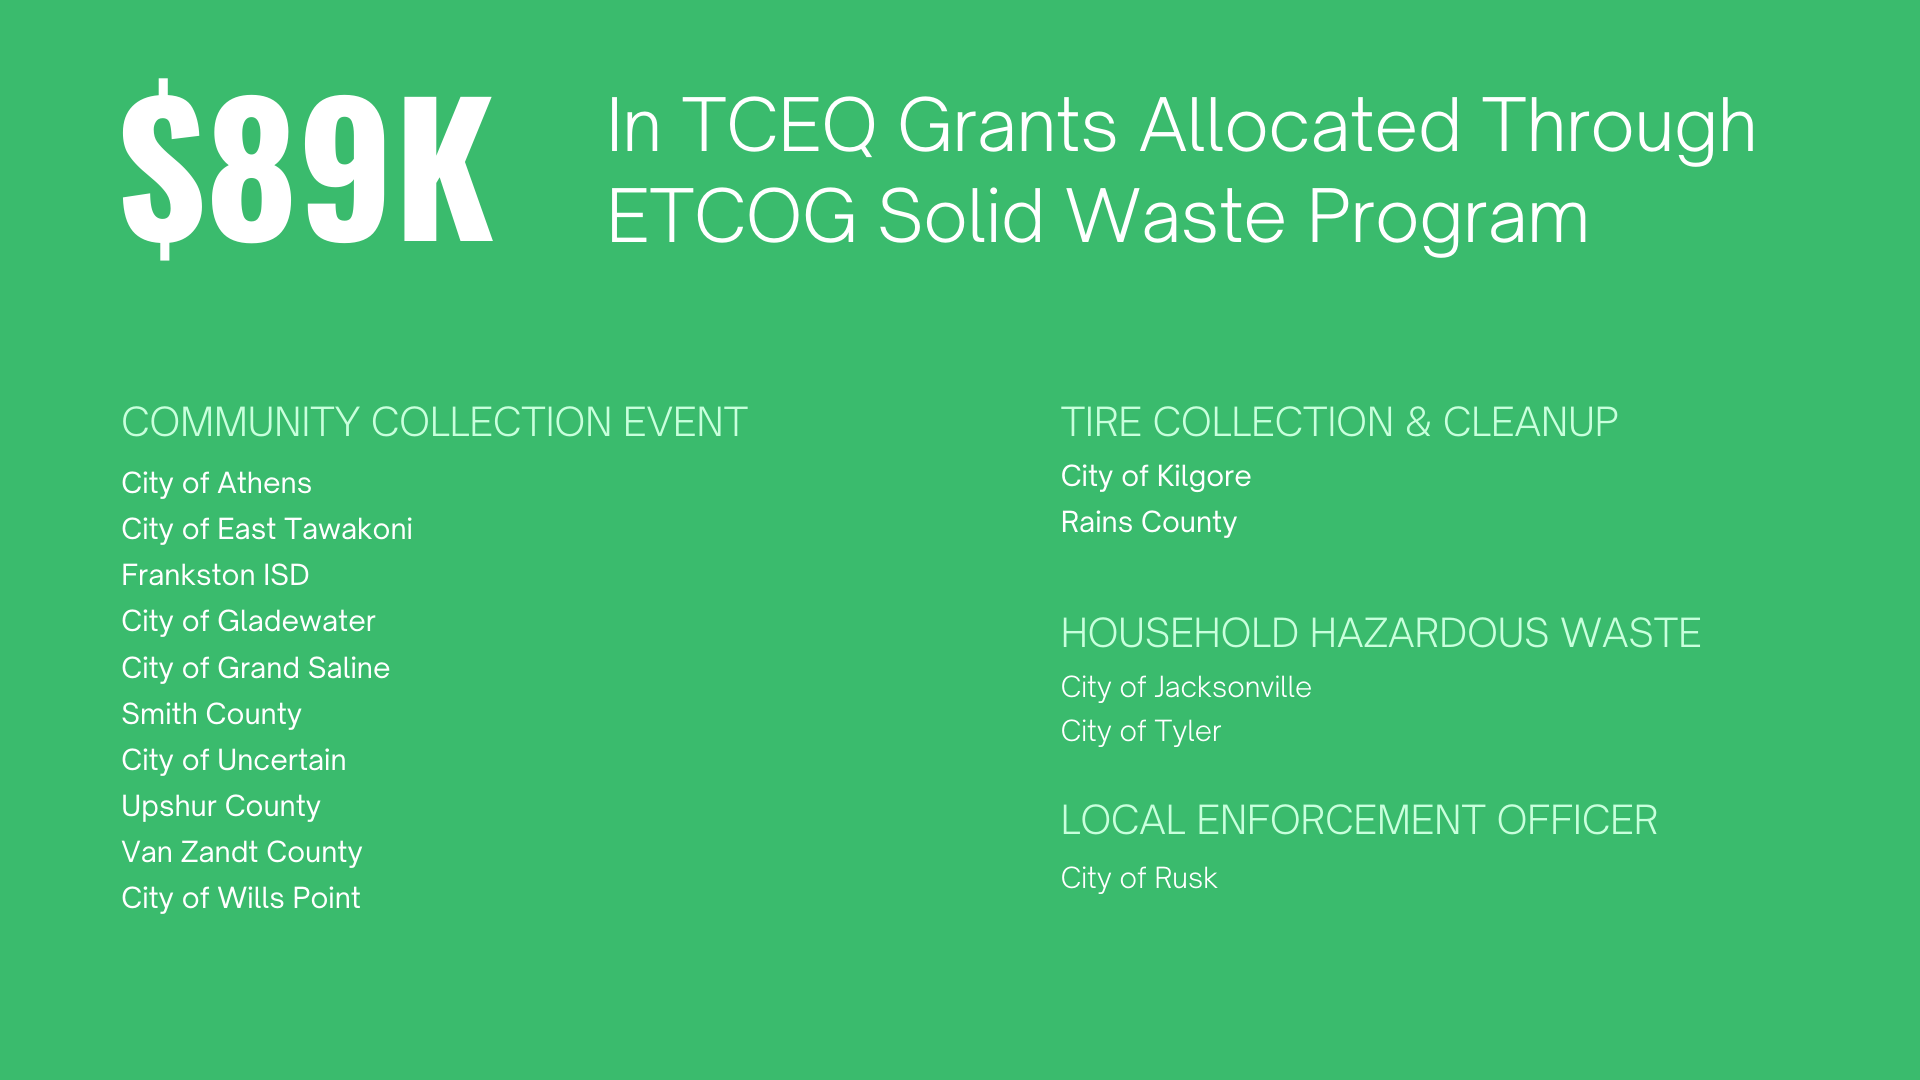 A green sign that says $ 89k in tceq grants allocated through etcog solid waste program